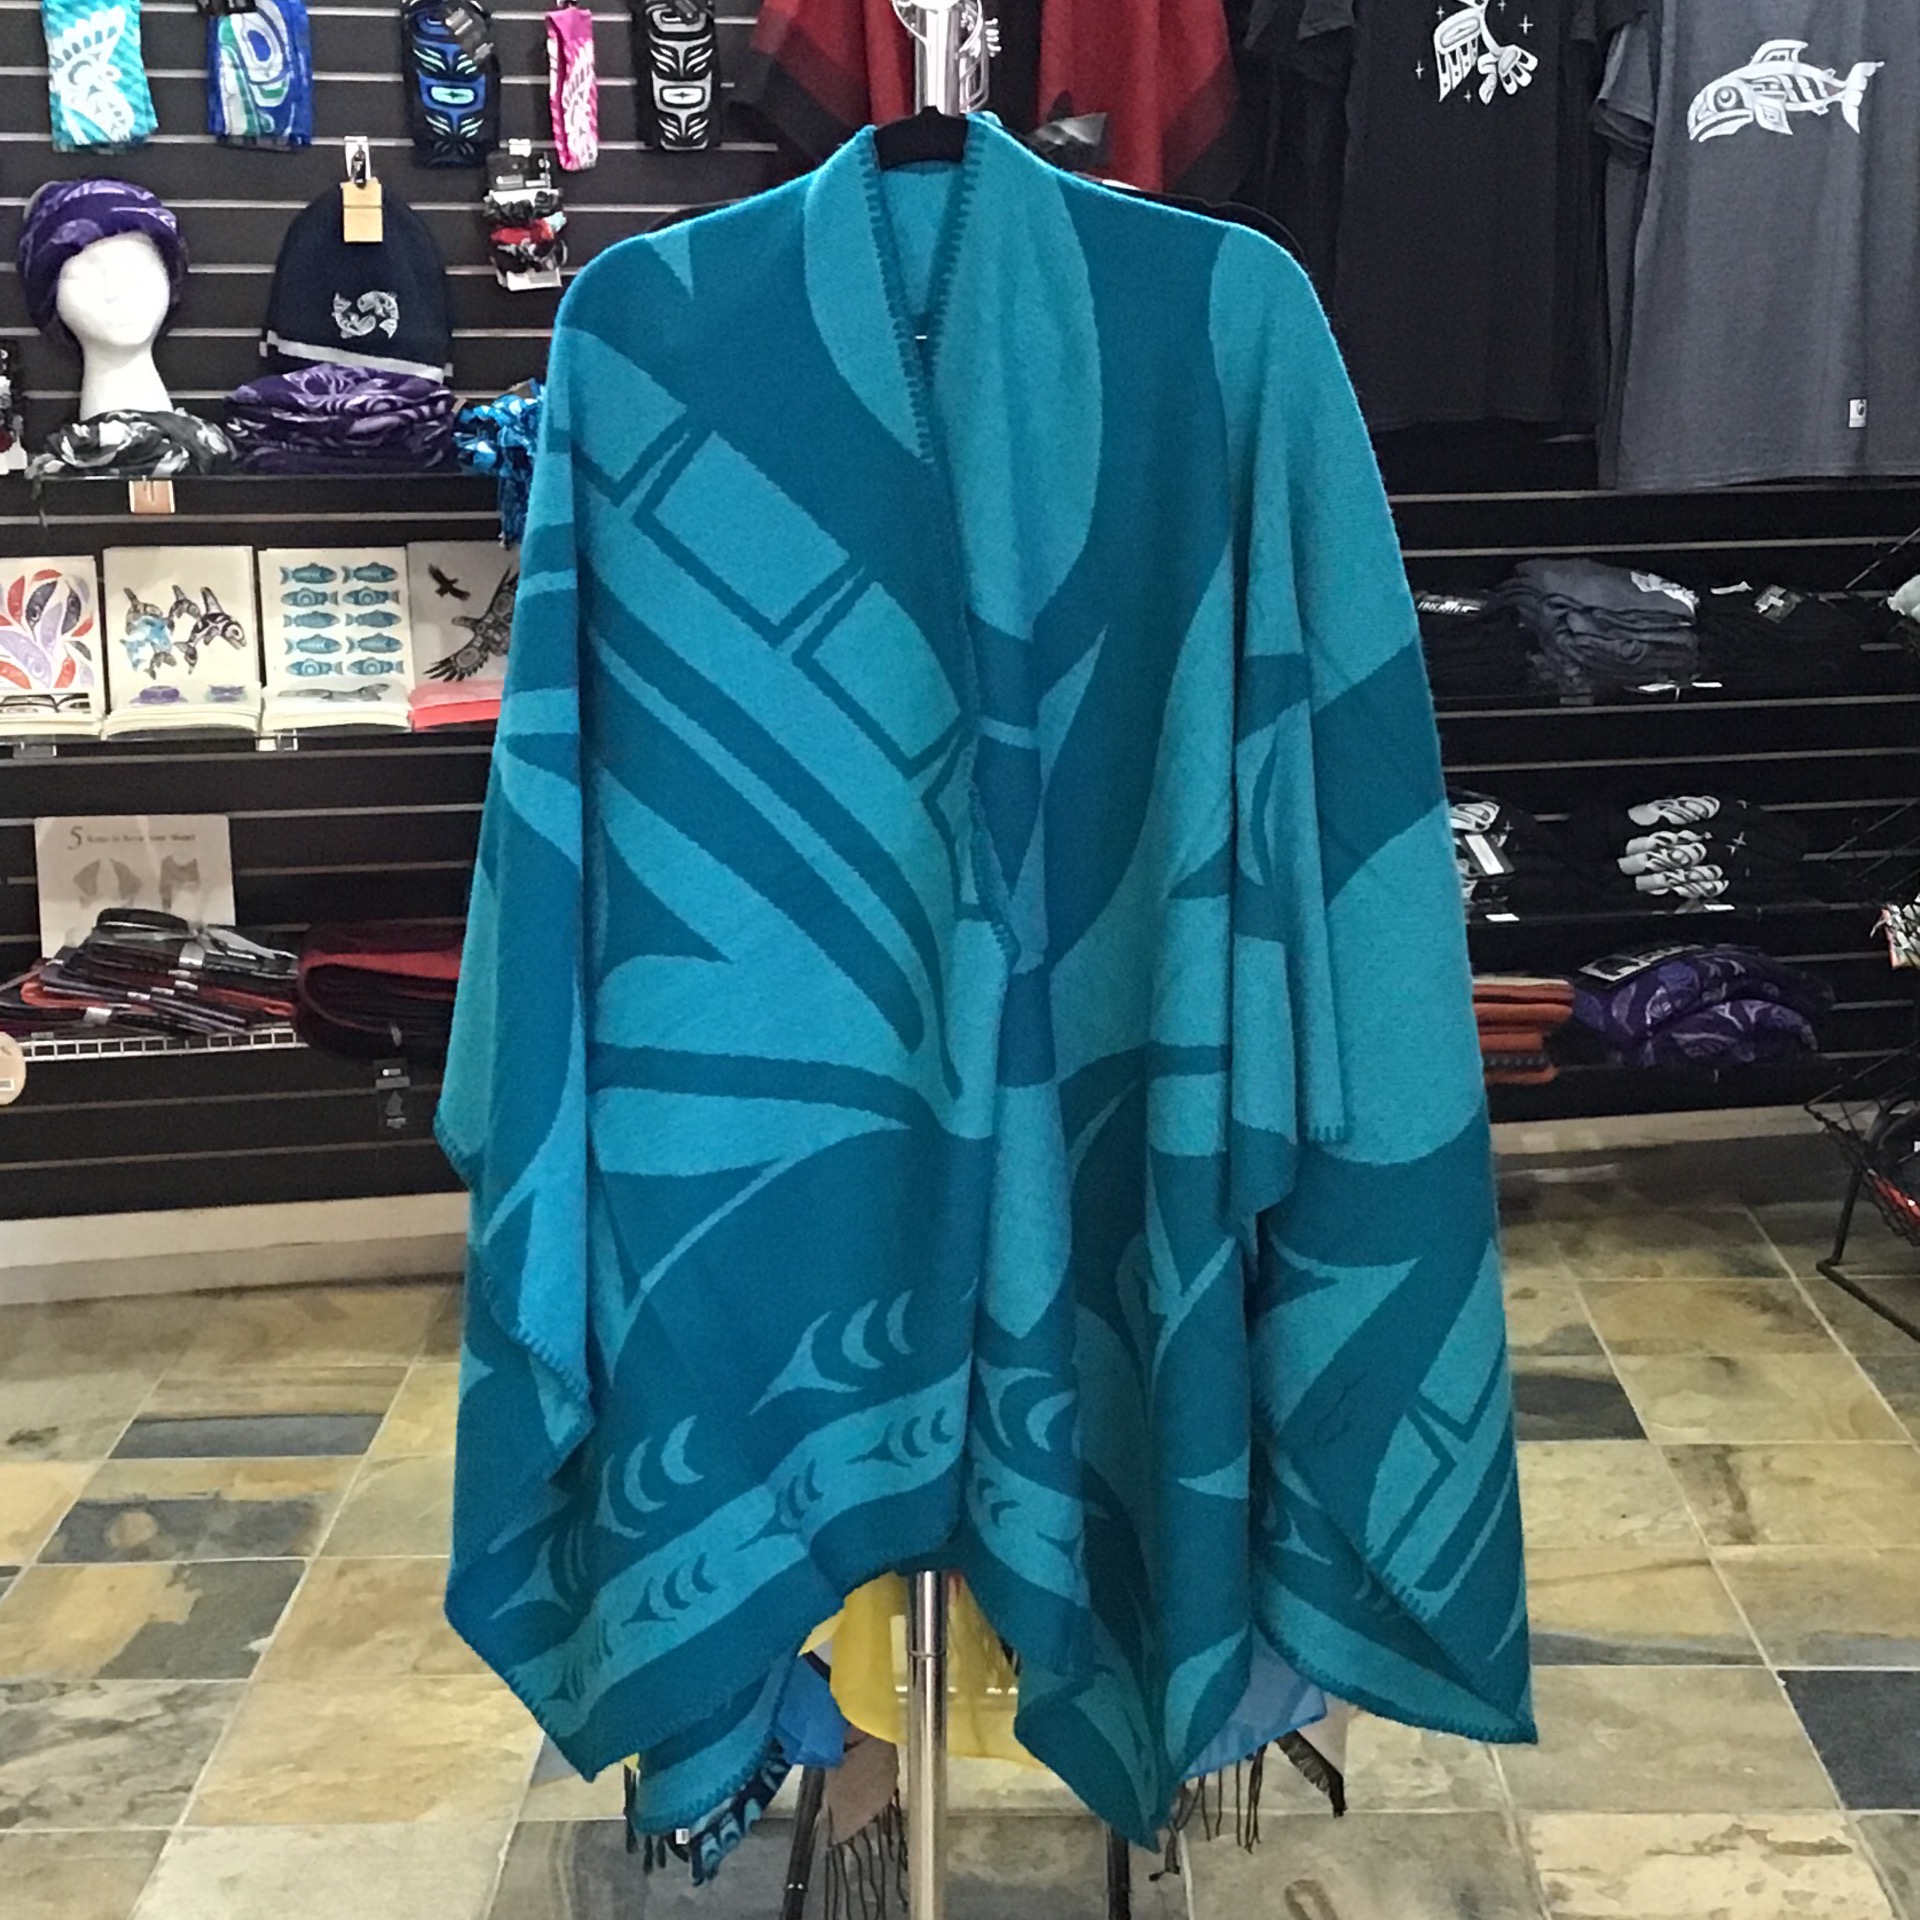 Reversible Fashion Wrap- “Whale” in Teal